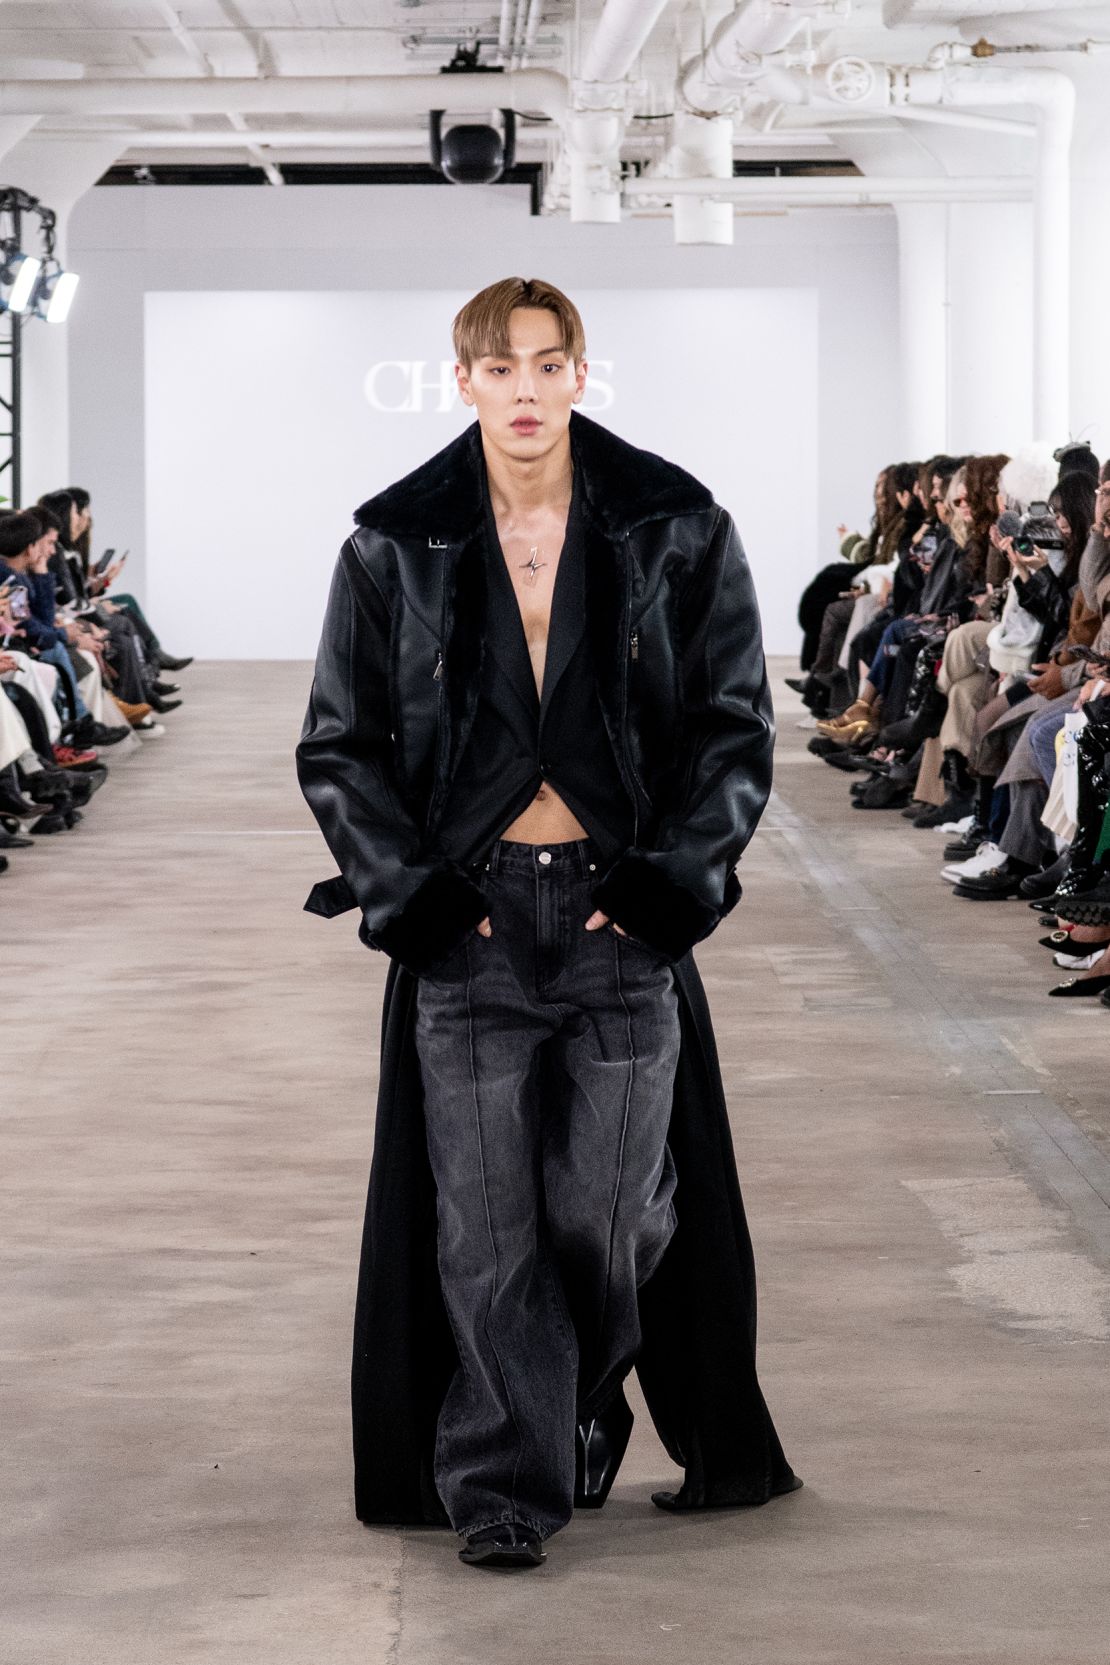 At the Concept Korea showcase of Korean designers' work, the K-Pop star Shownu (of boyband Monsta X) walked in each of the three collections featured.